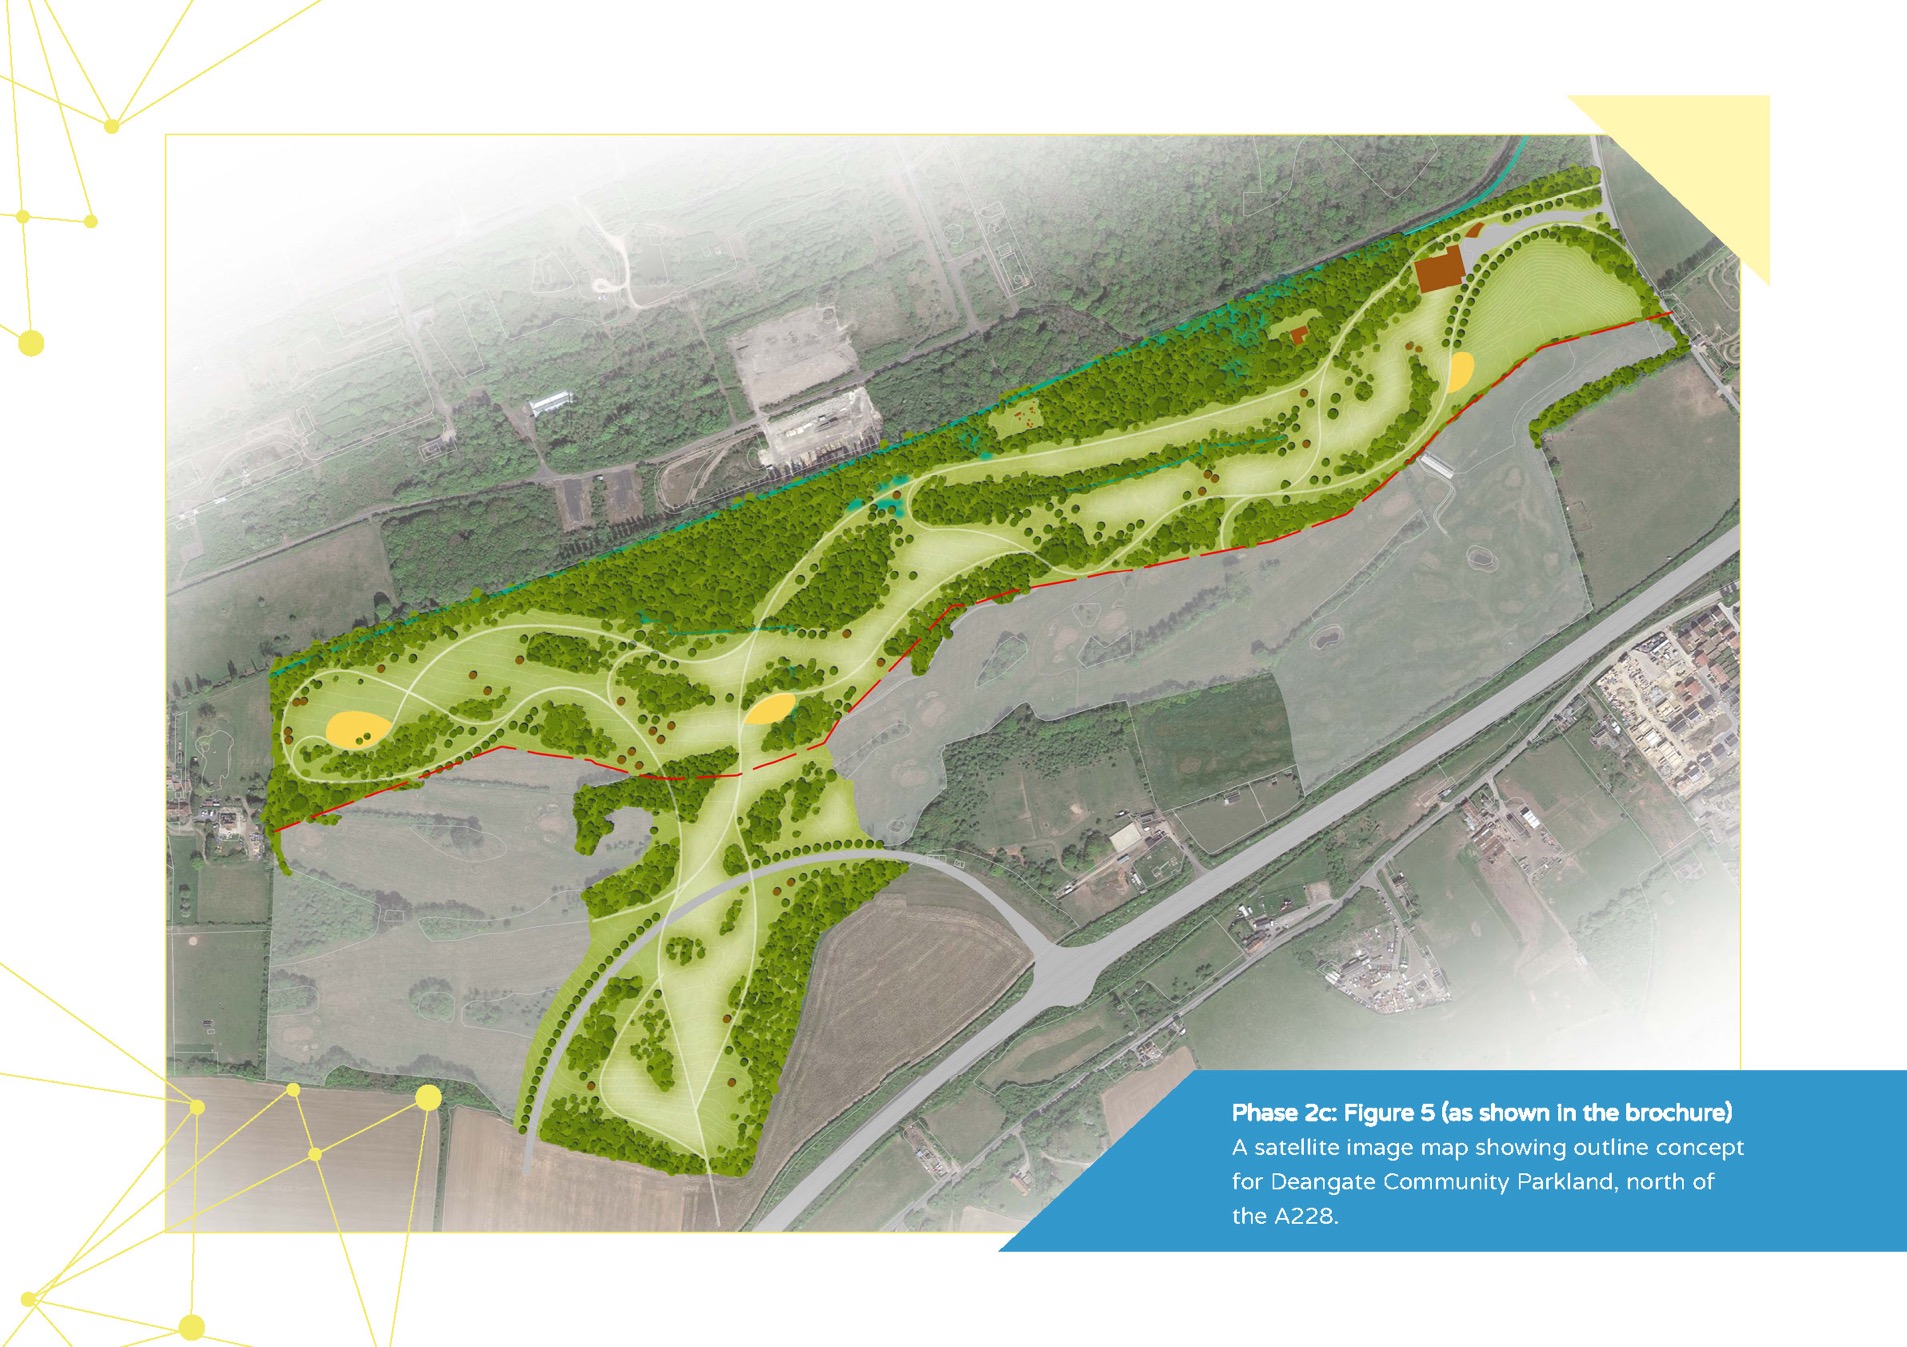 A satellite image map showing outline concept for Deangate Community Parkland, north of the A228